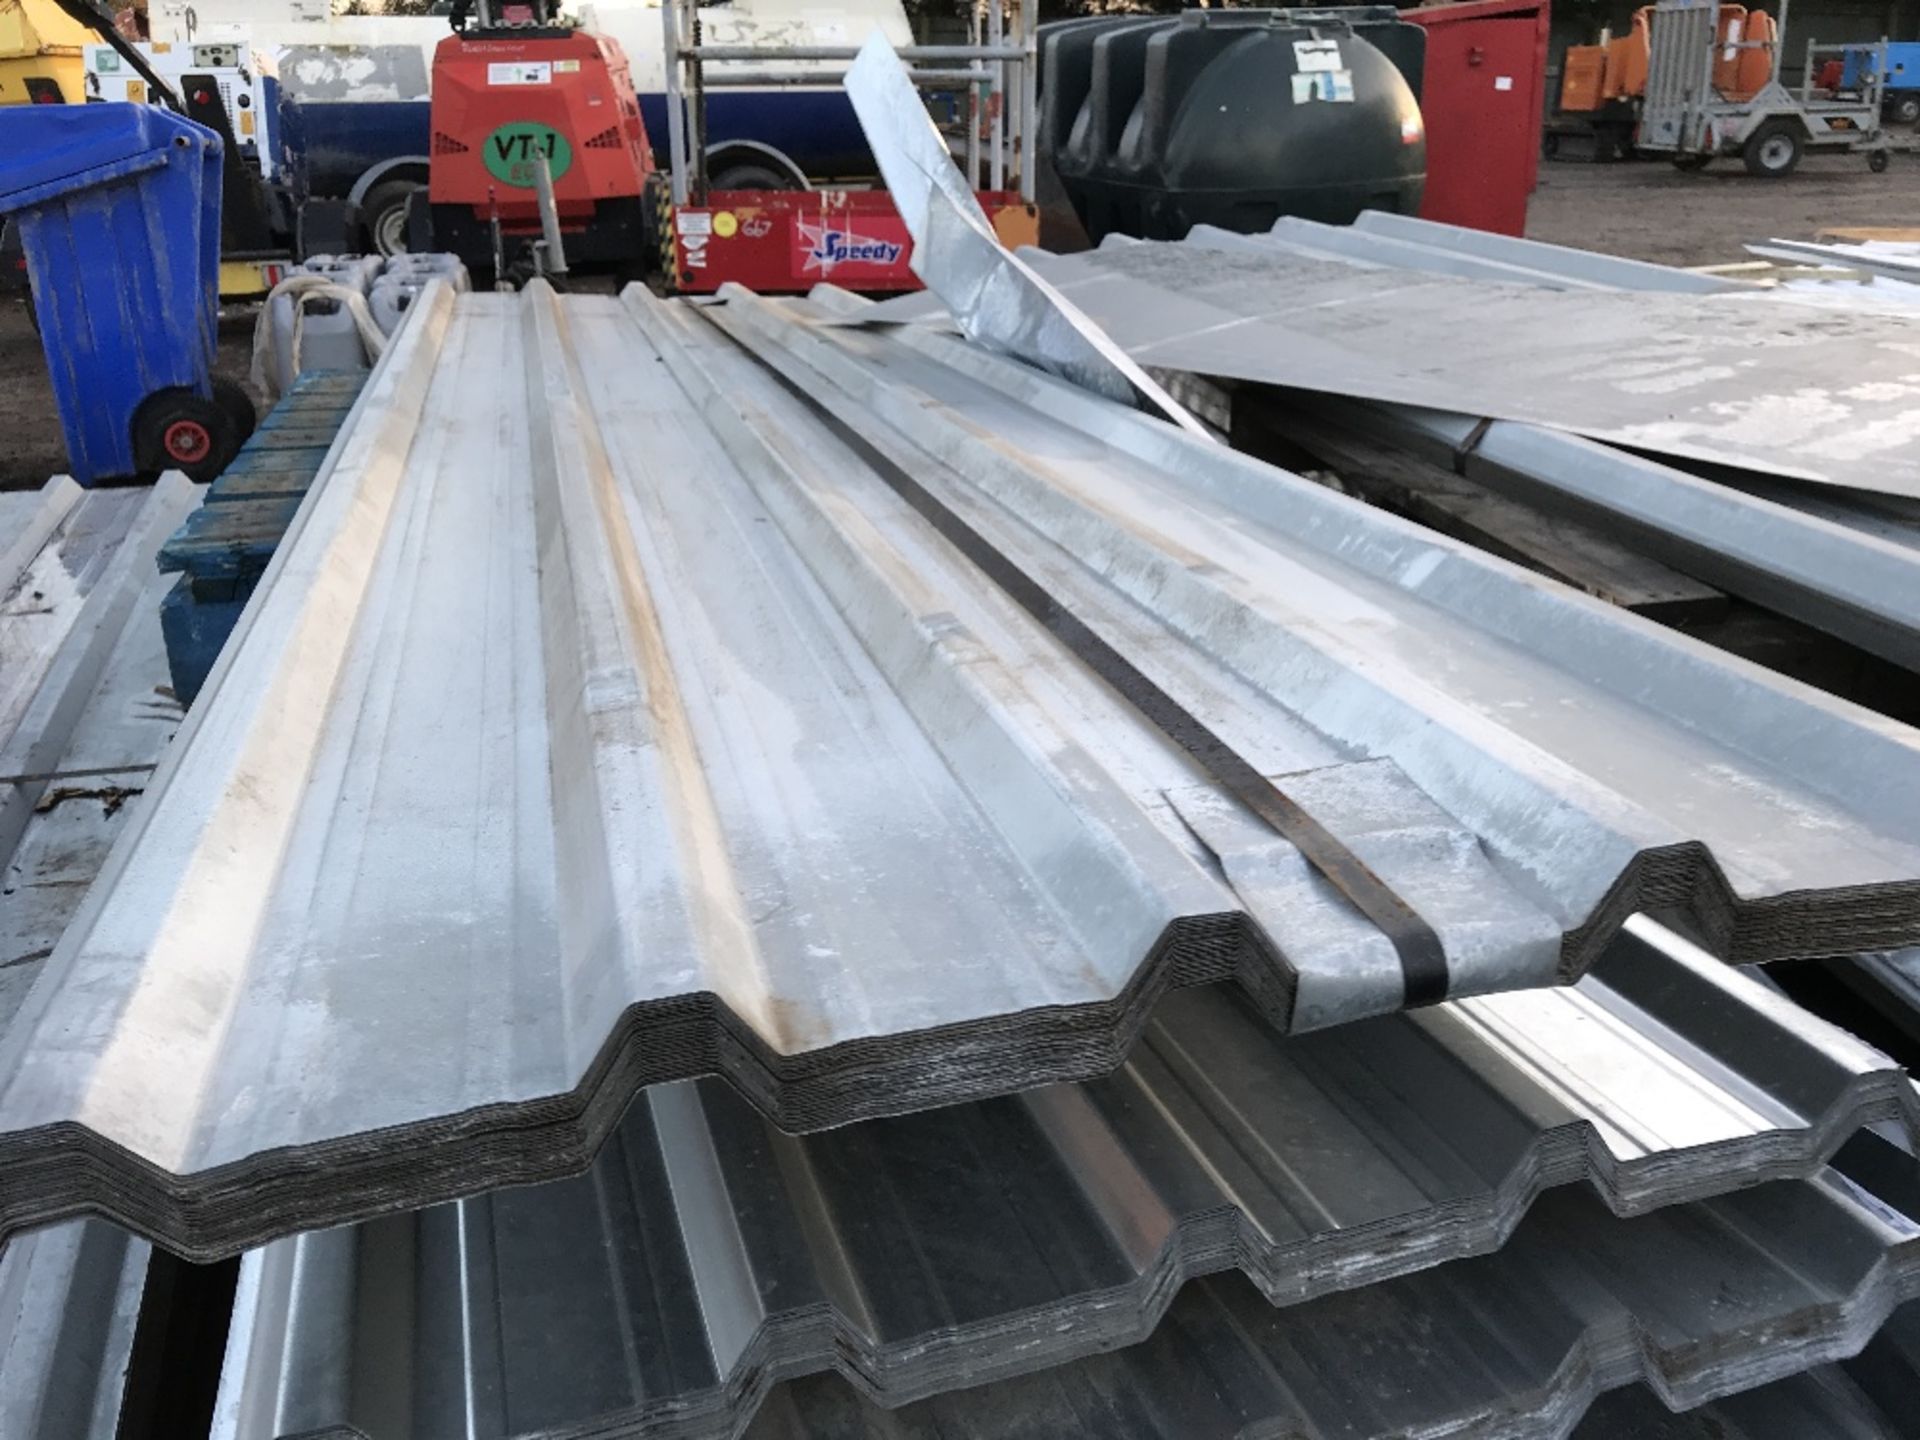 Pack of 25no. 10ft galvanised box profile roof sheets